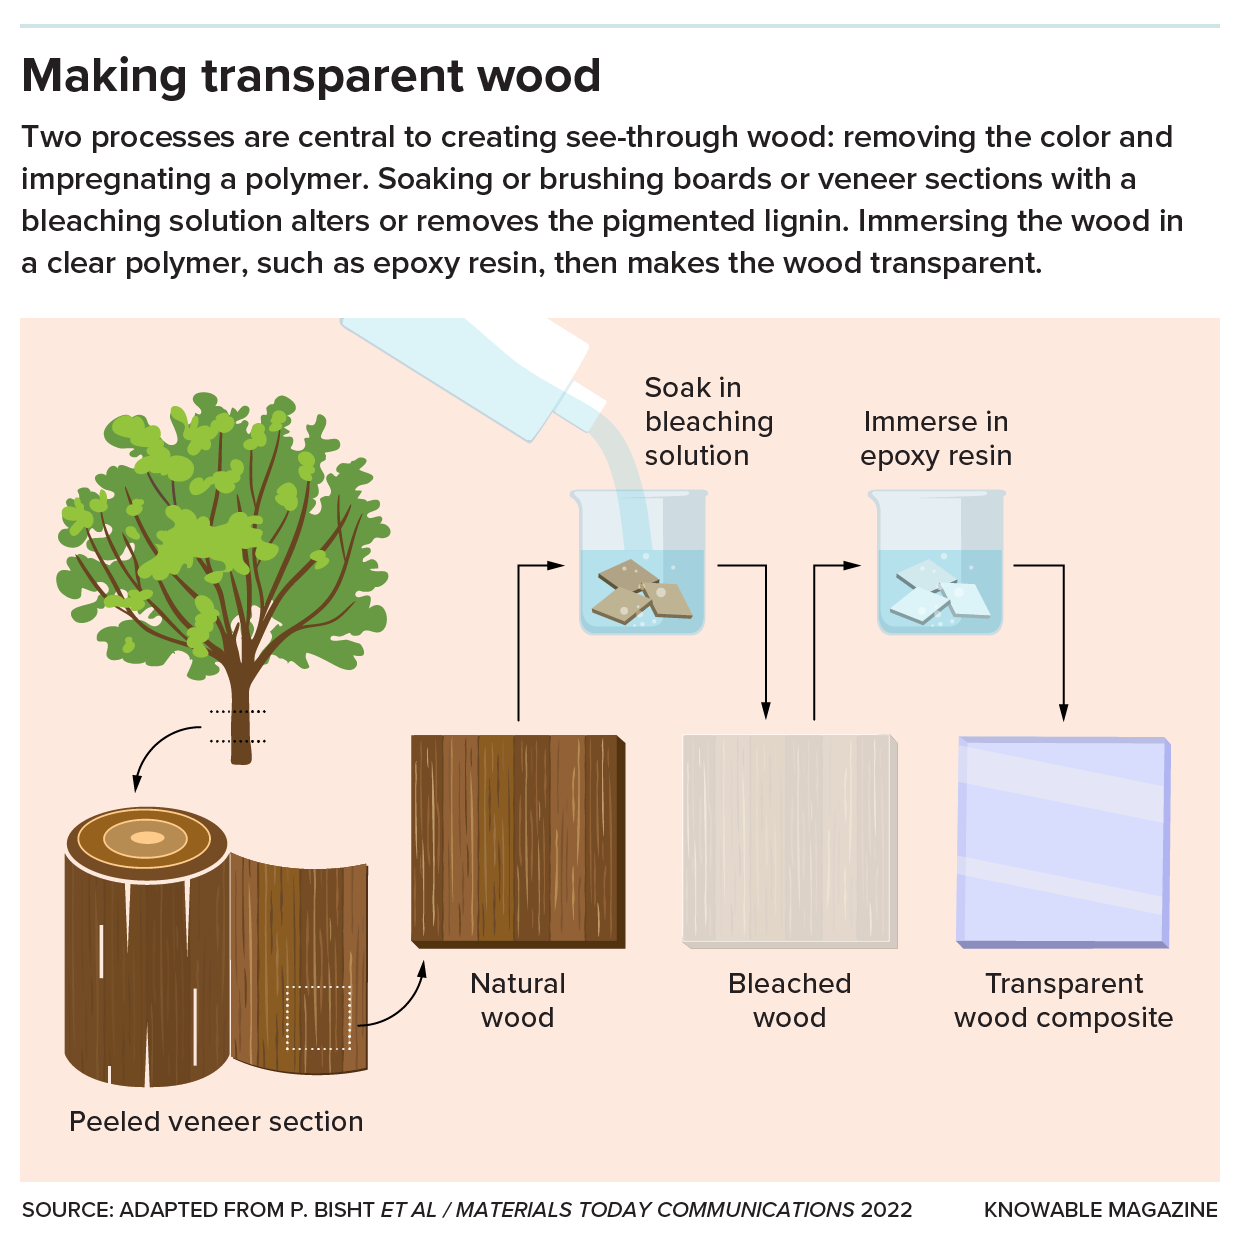 Graphic shows the steps for making transparent wood